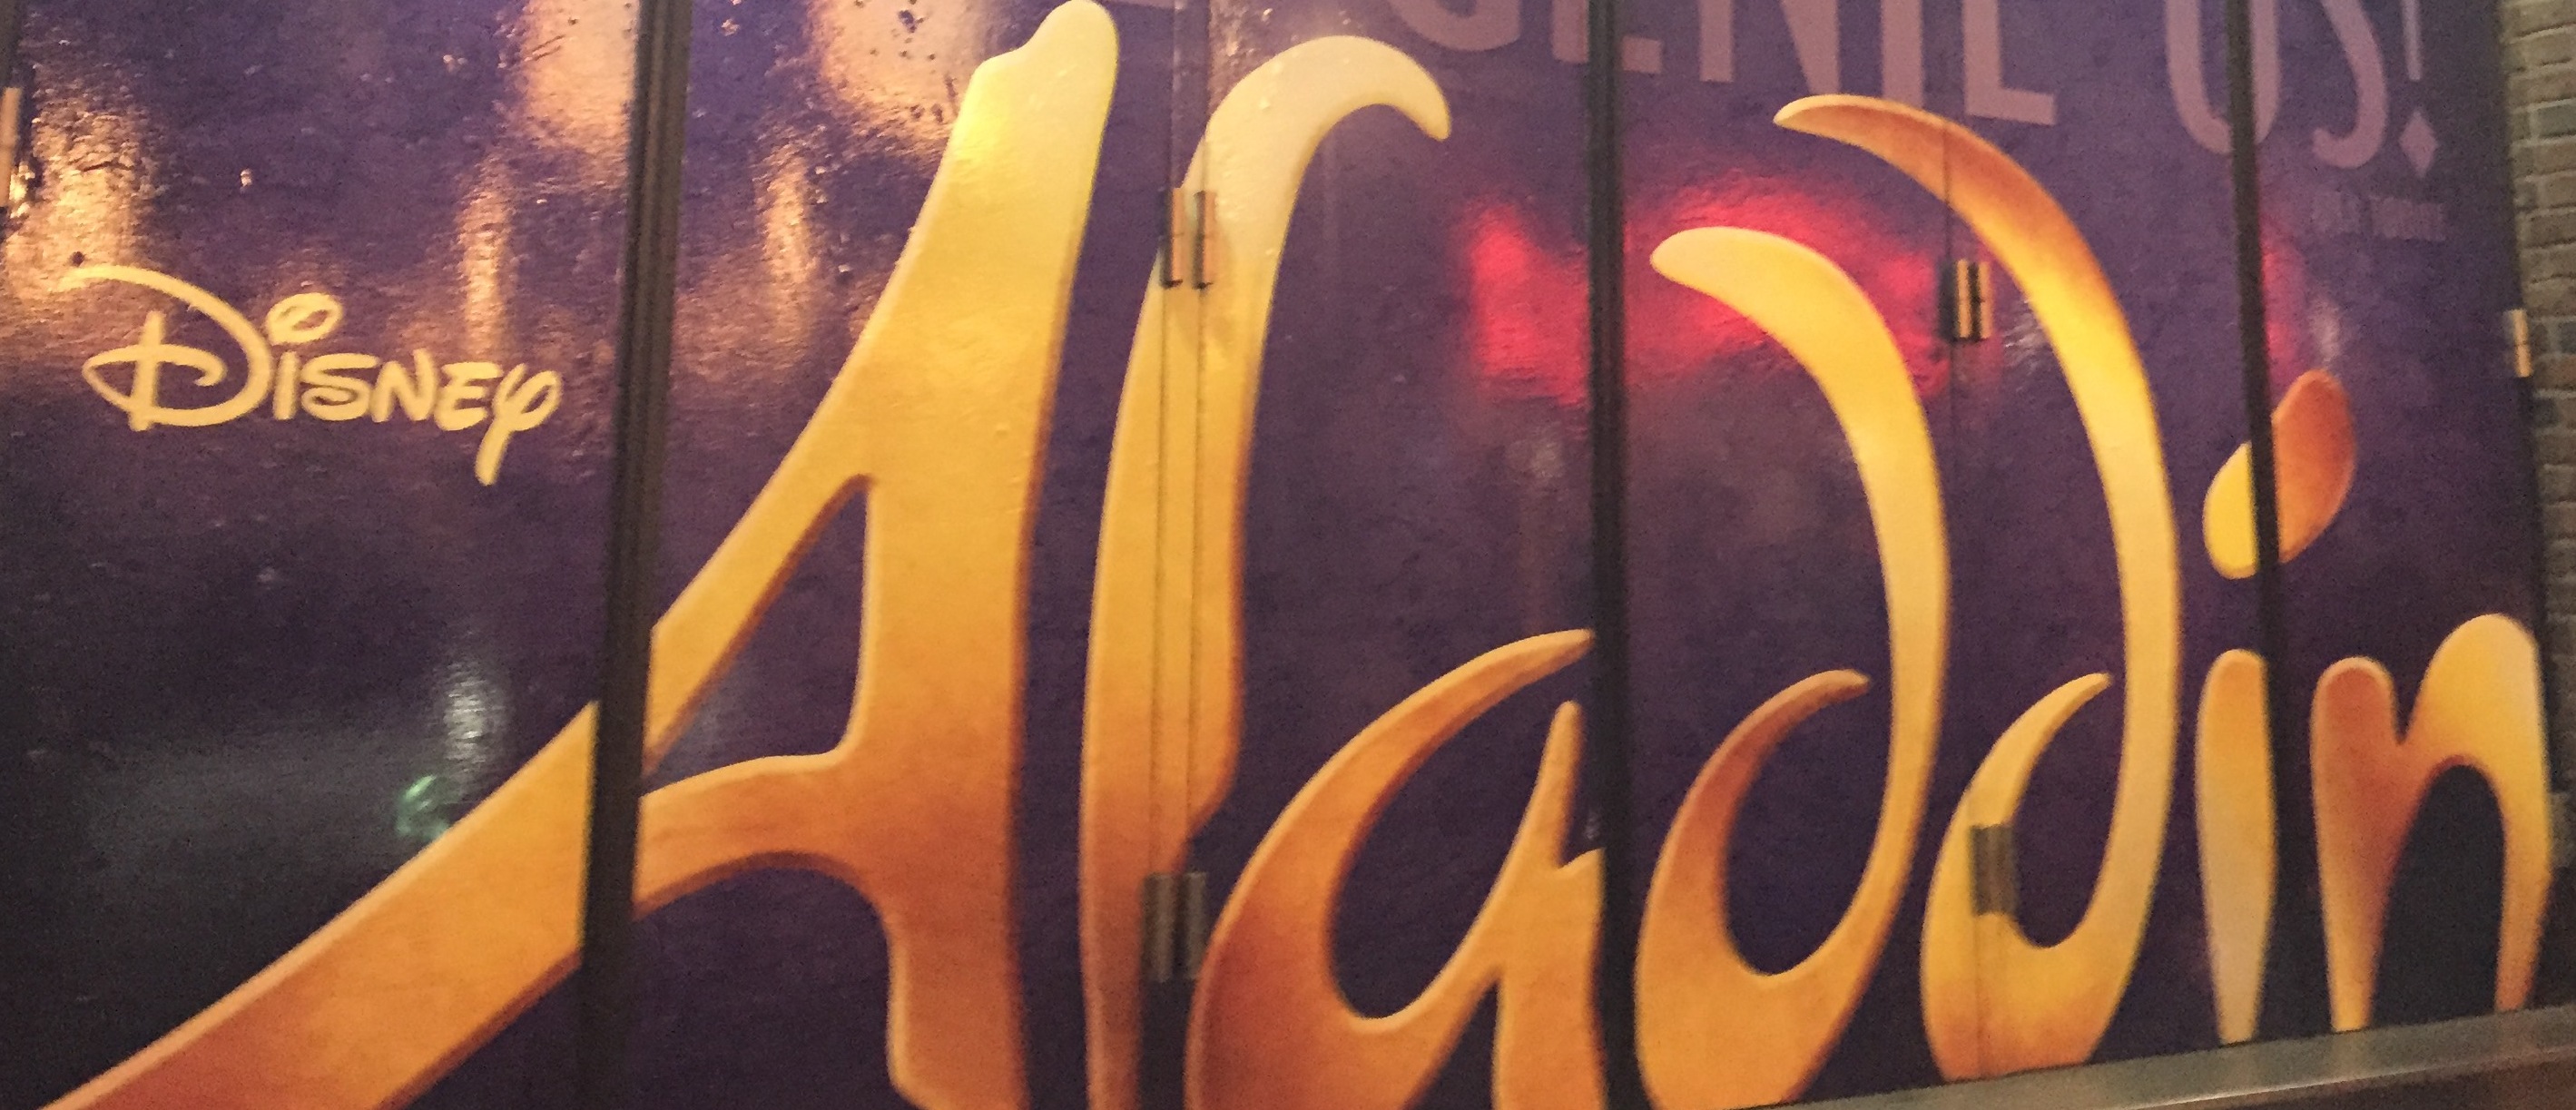 Review of Aladdin the Musical on Broadway